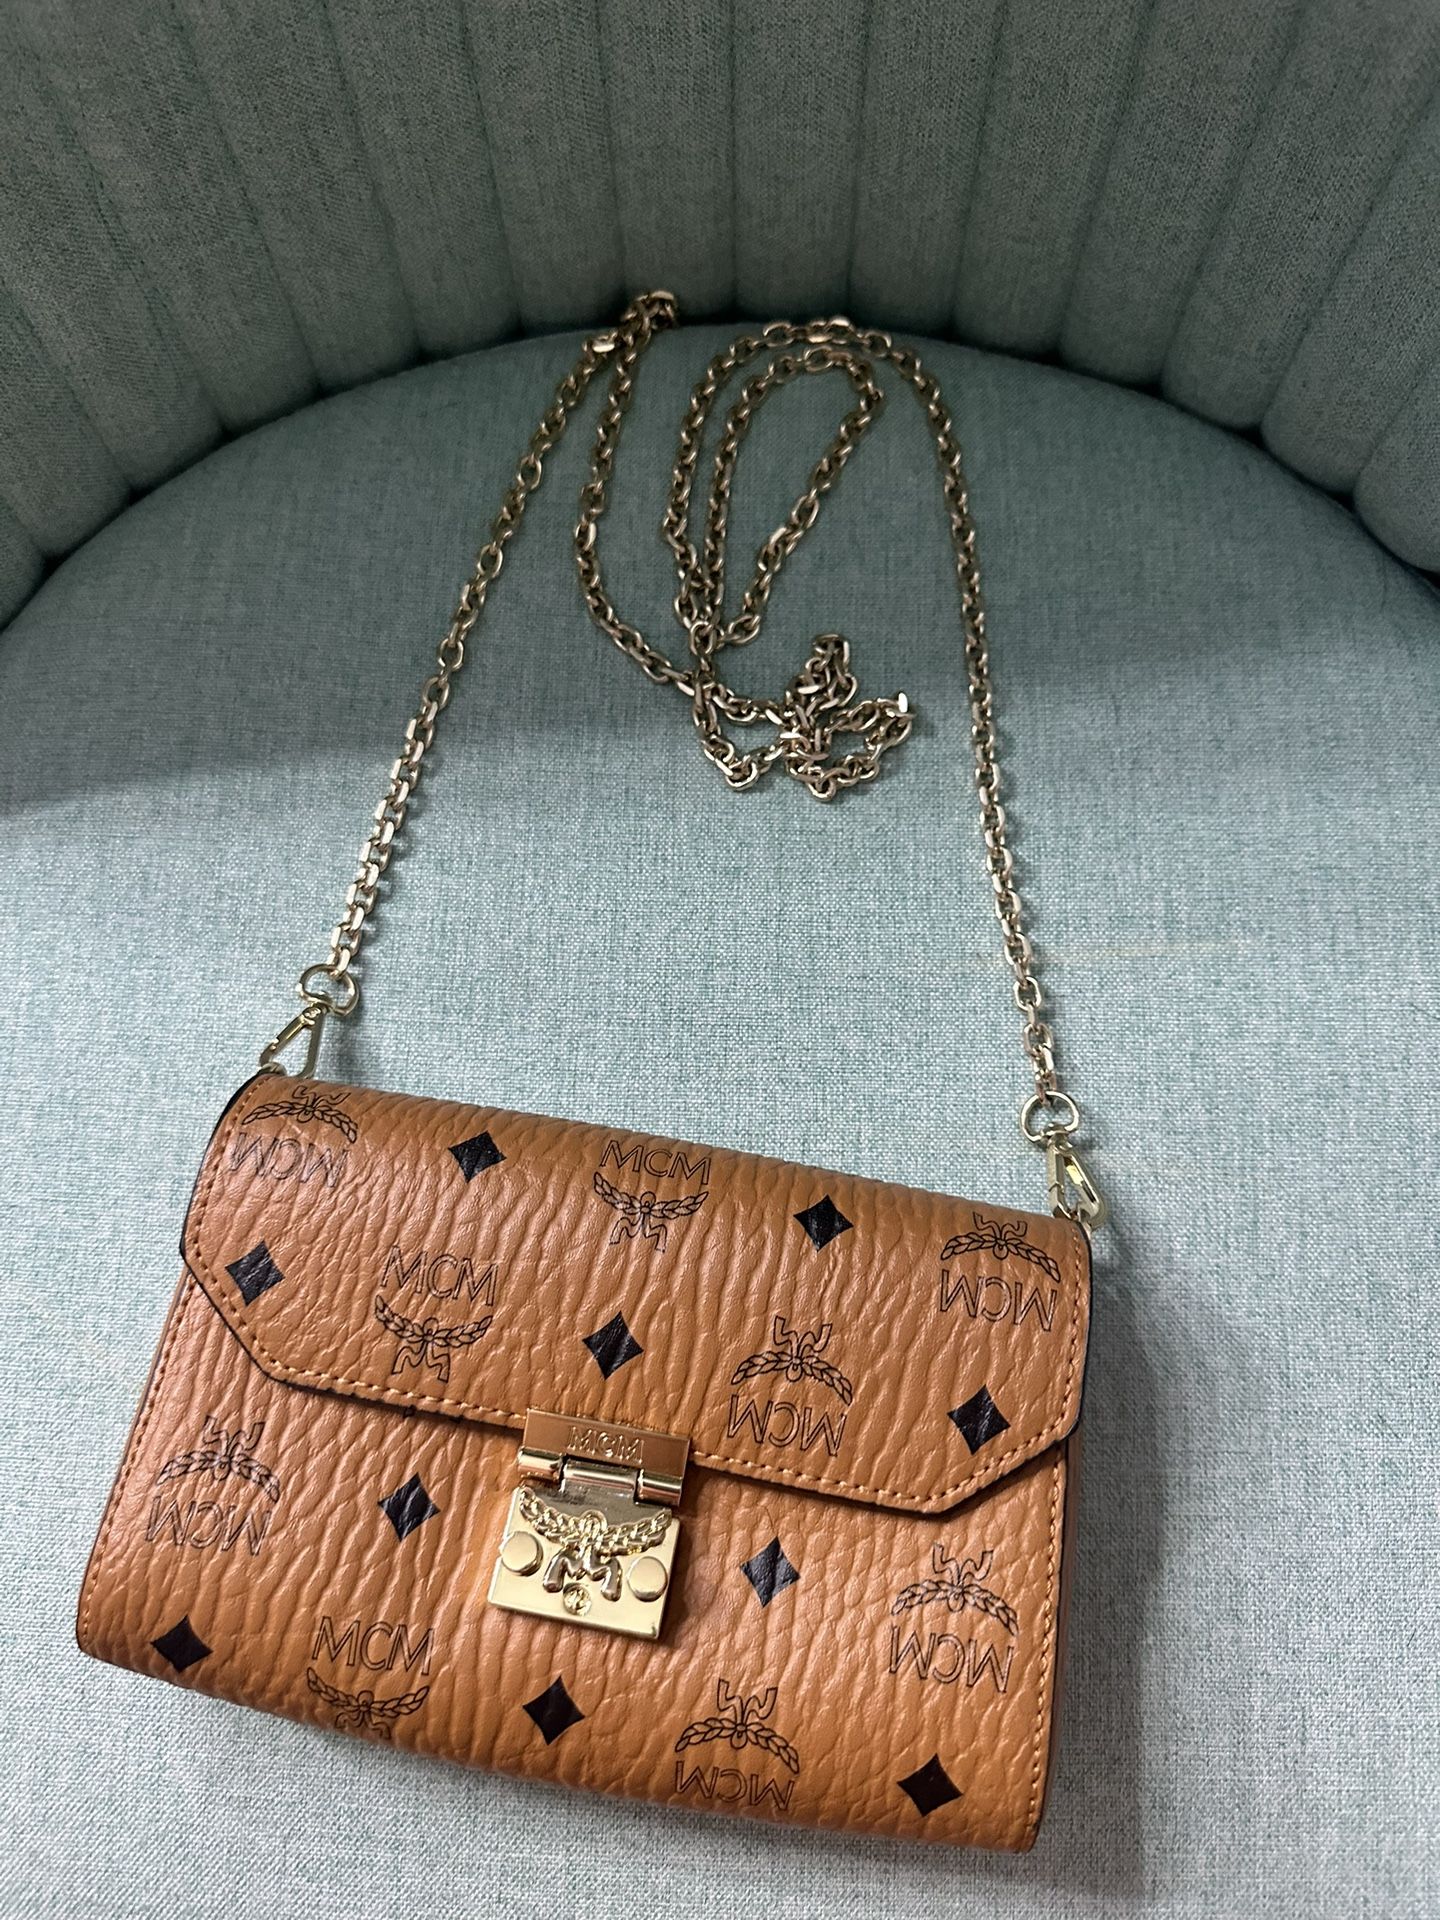 MCM Bag for Sale in Houston, TX - OfferUp